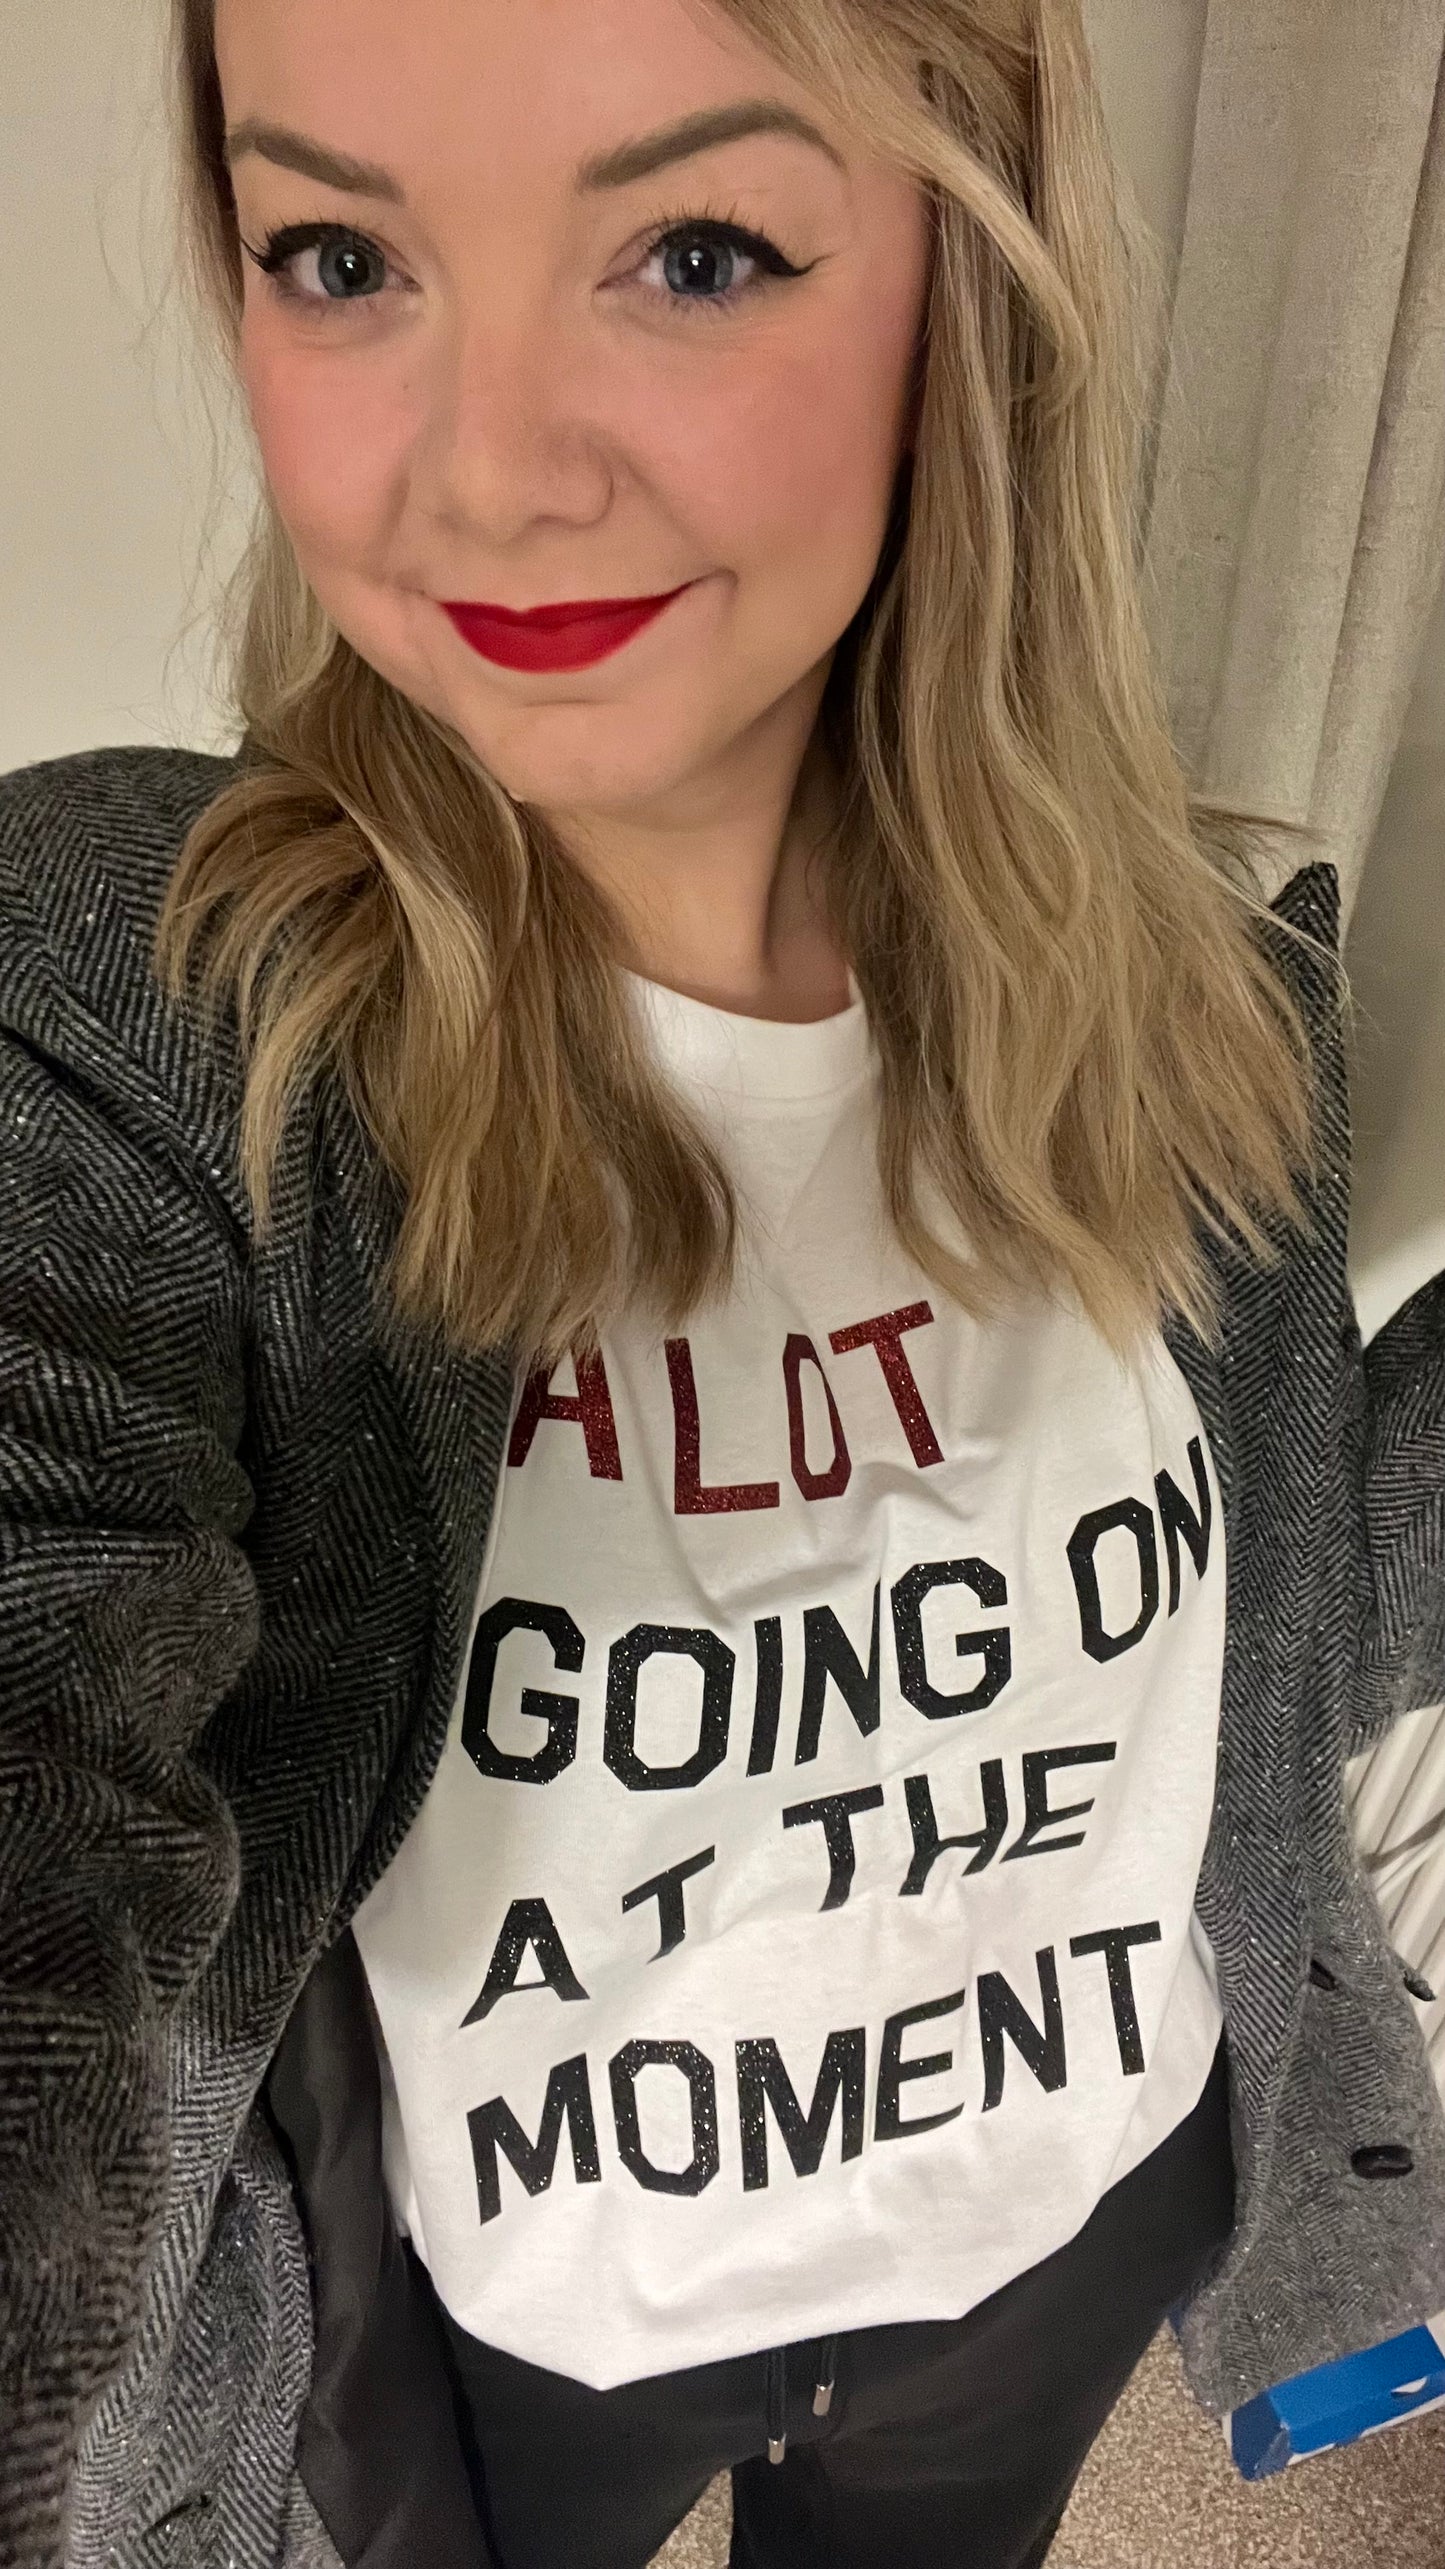 “A Lot Going On At The Moment” T-Shirt